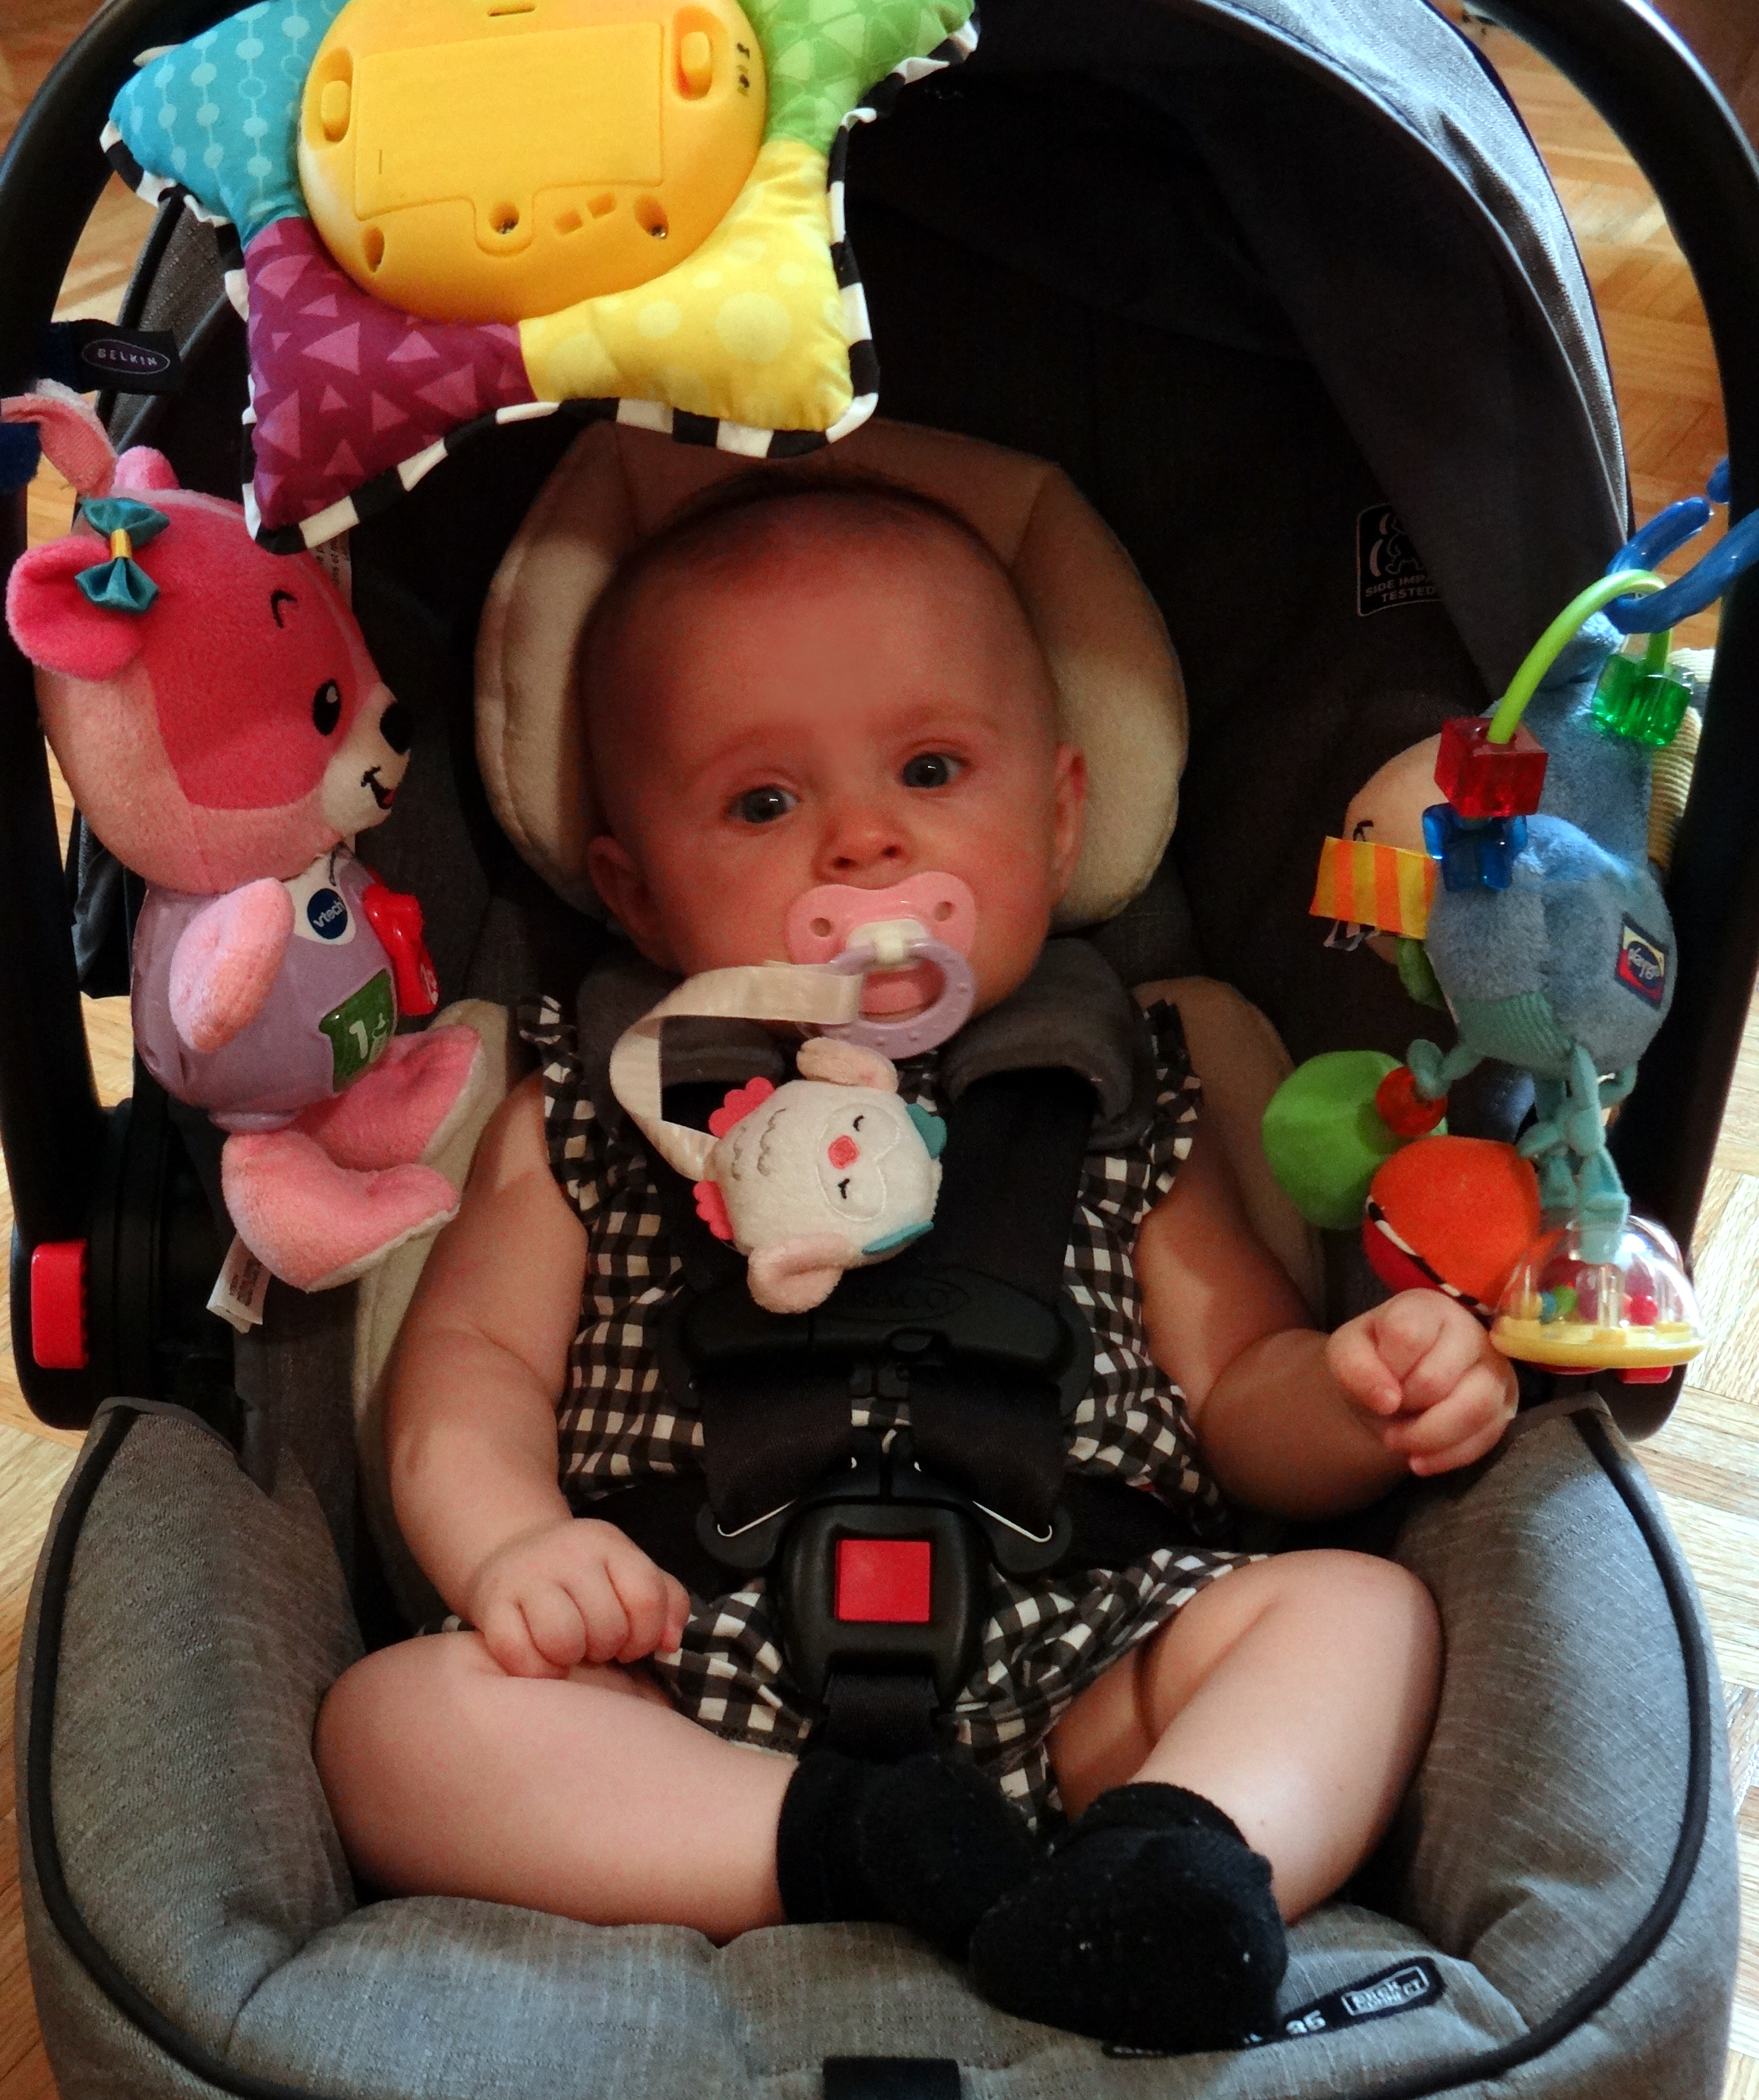 Baby in a car carrier with toys